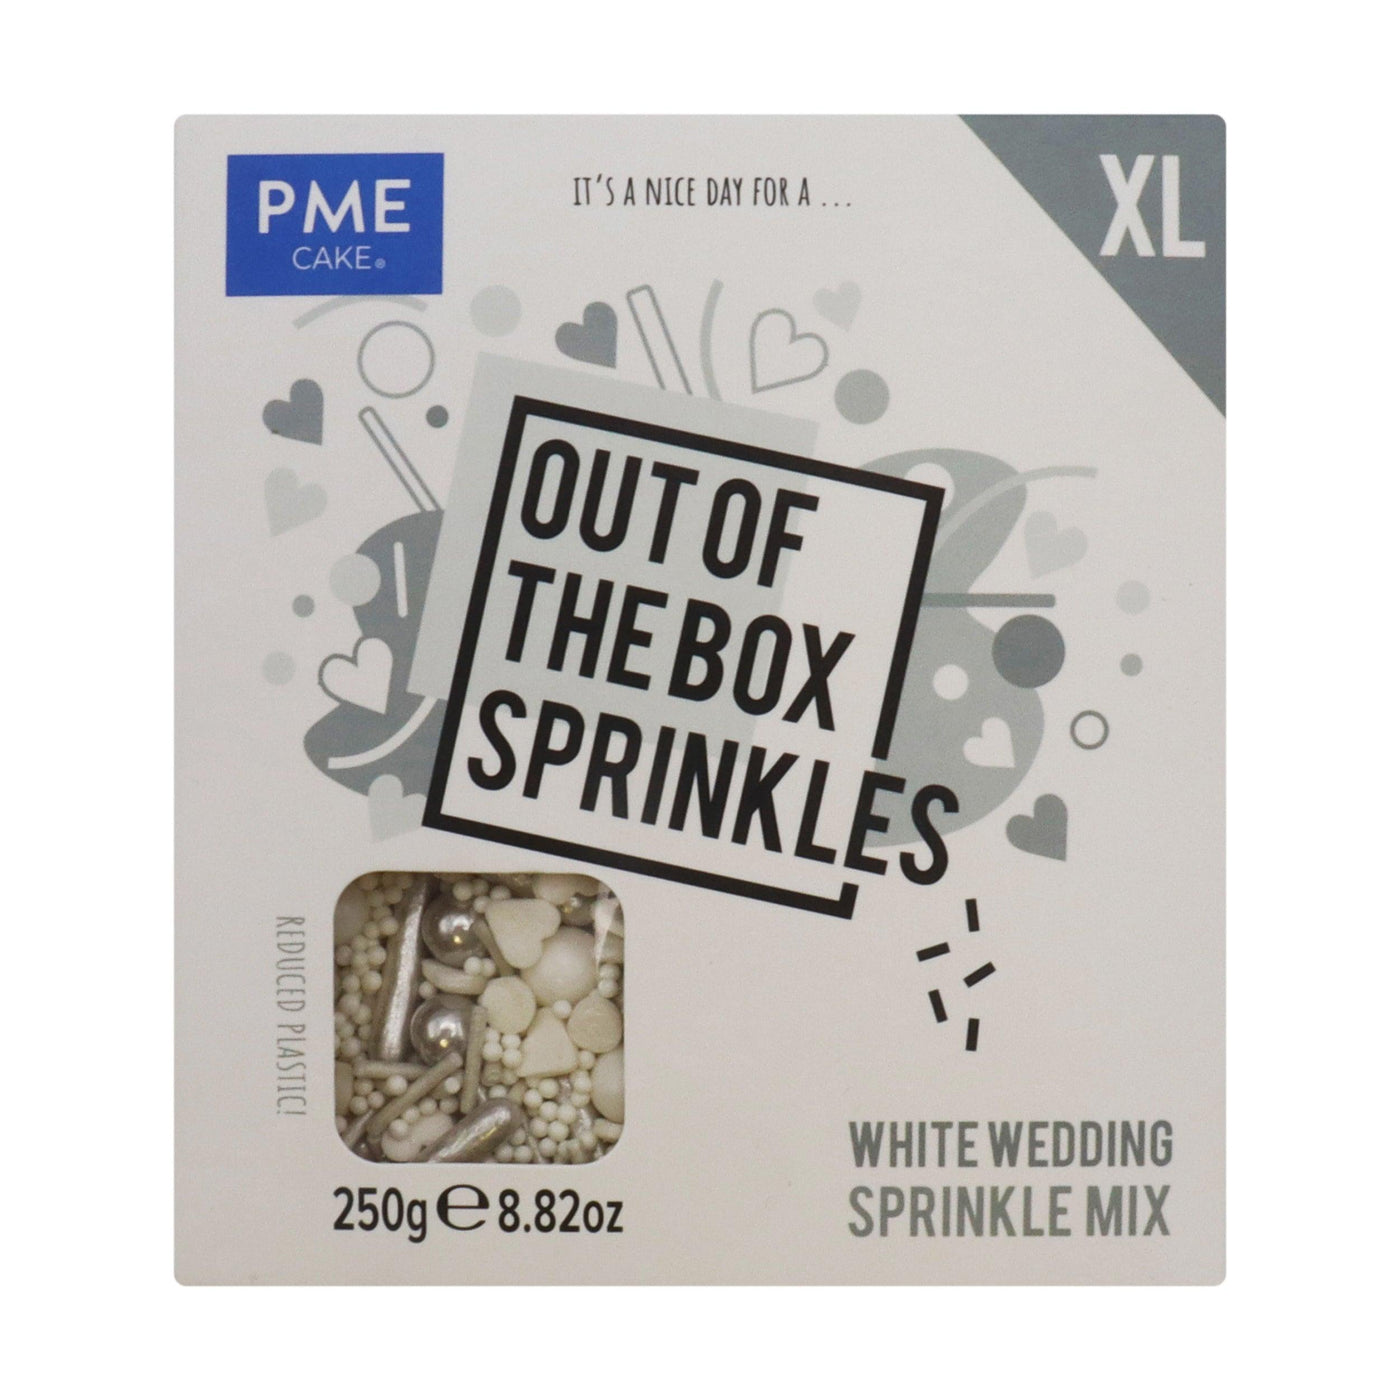 Out of the Box Sprinkles - White Wedding - PME